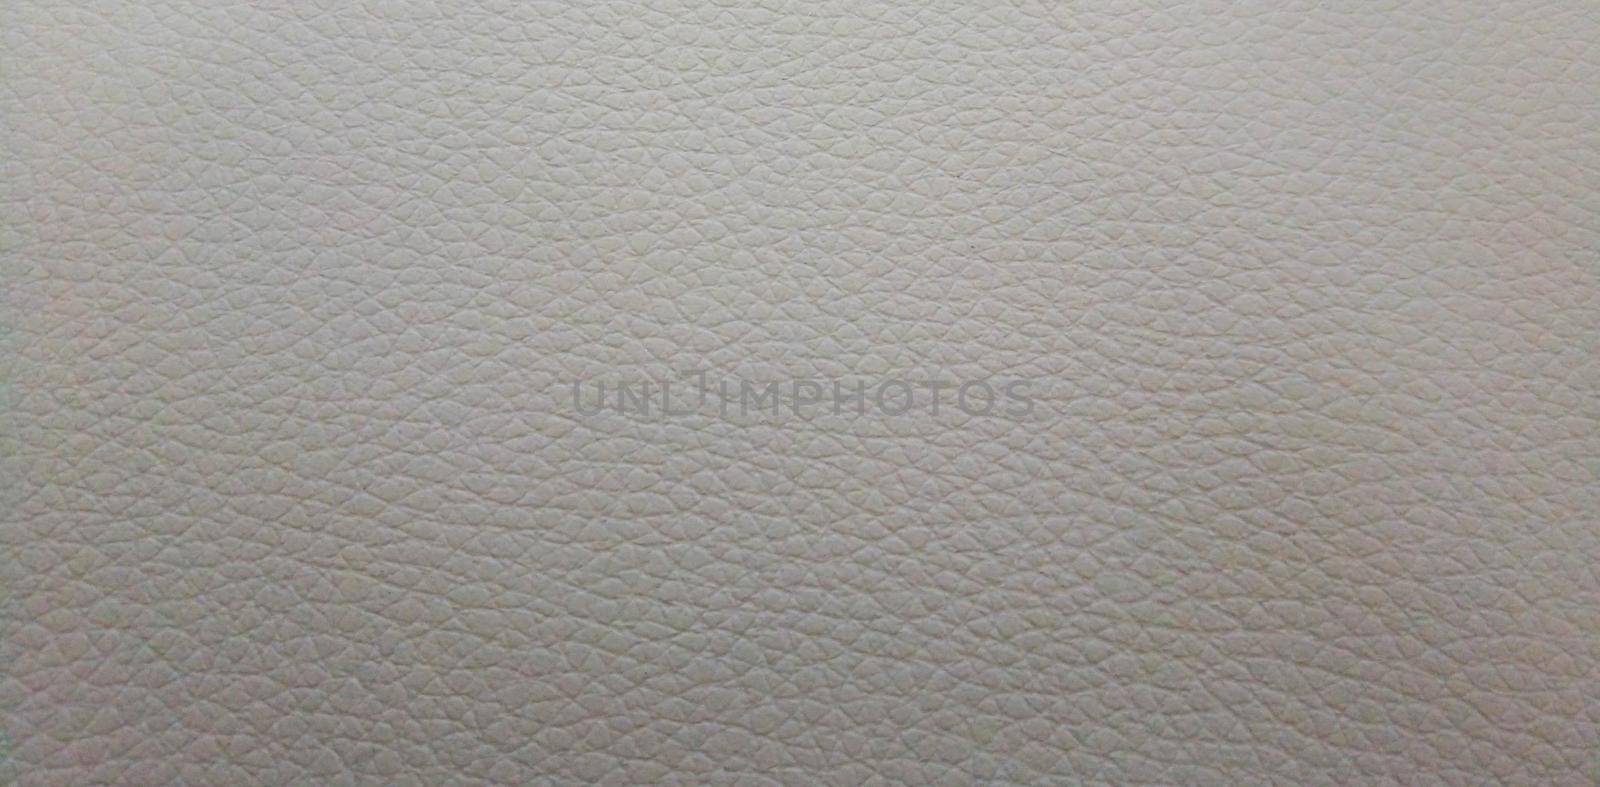 Gray background of the skin texture. Leather pattern for the manufacture of luxury shoes, clothing, bags and fashion clothing. space for text.